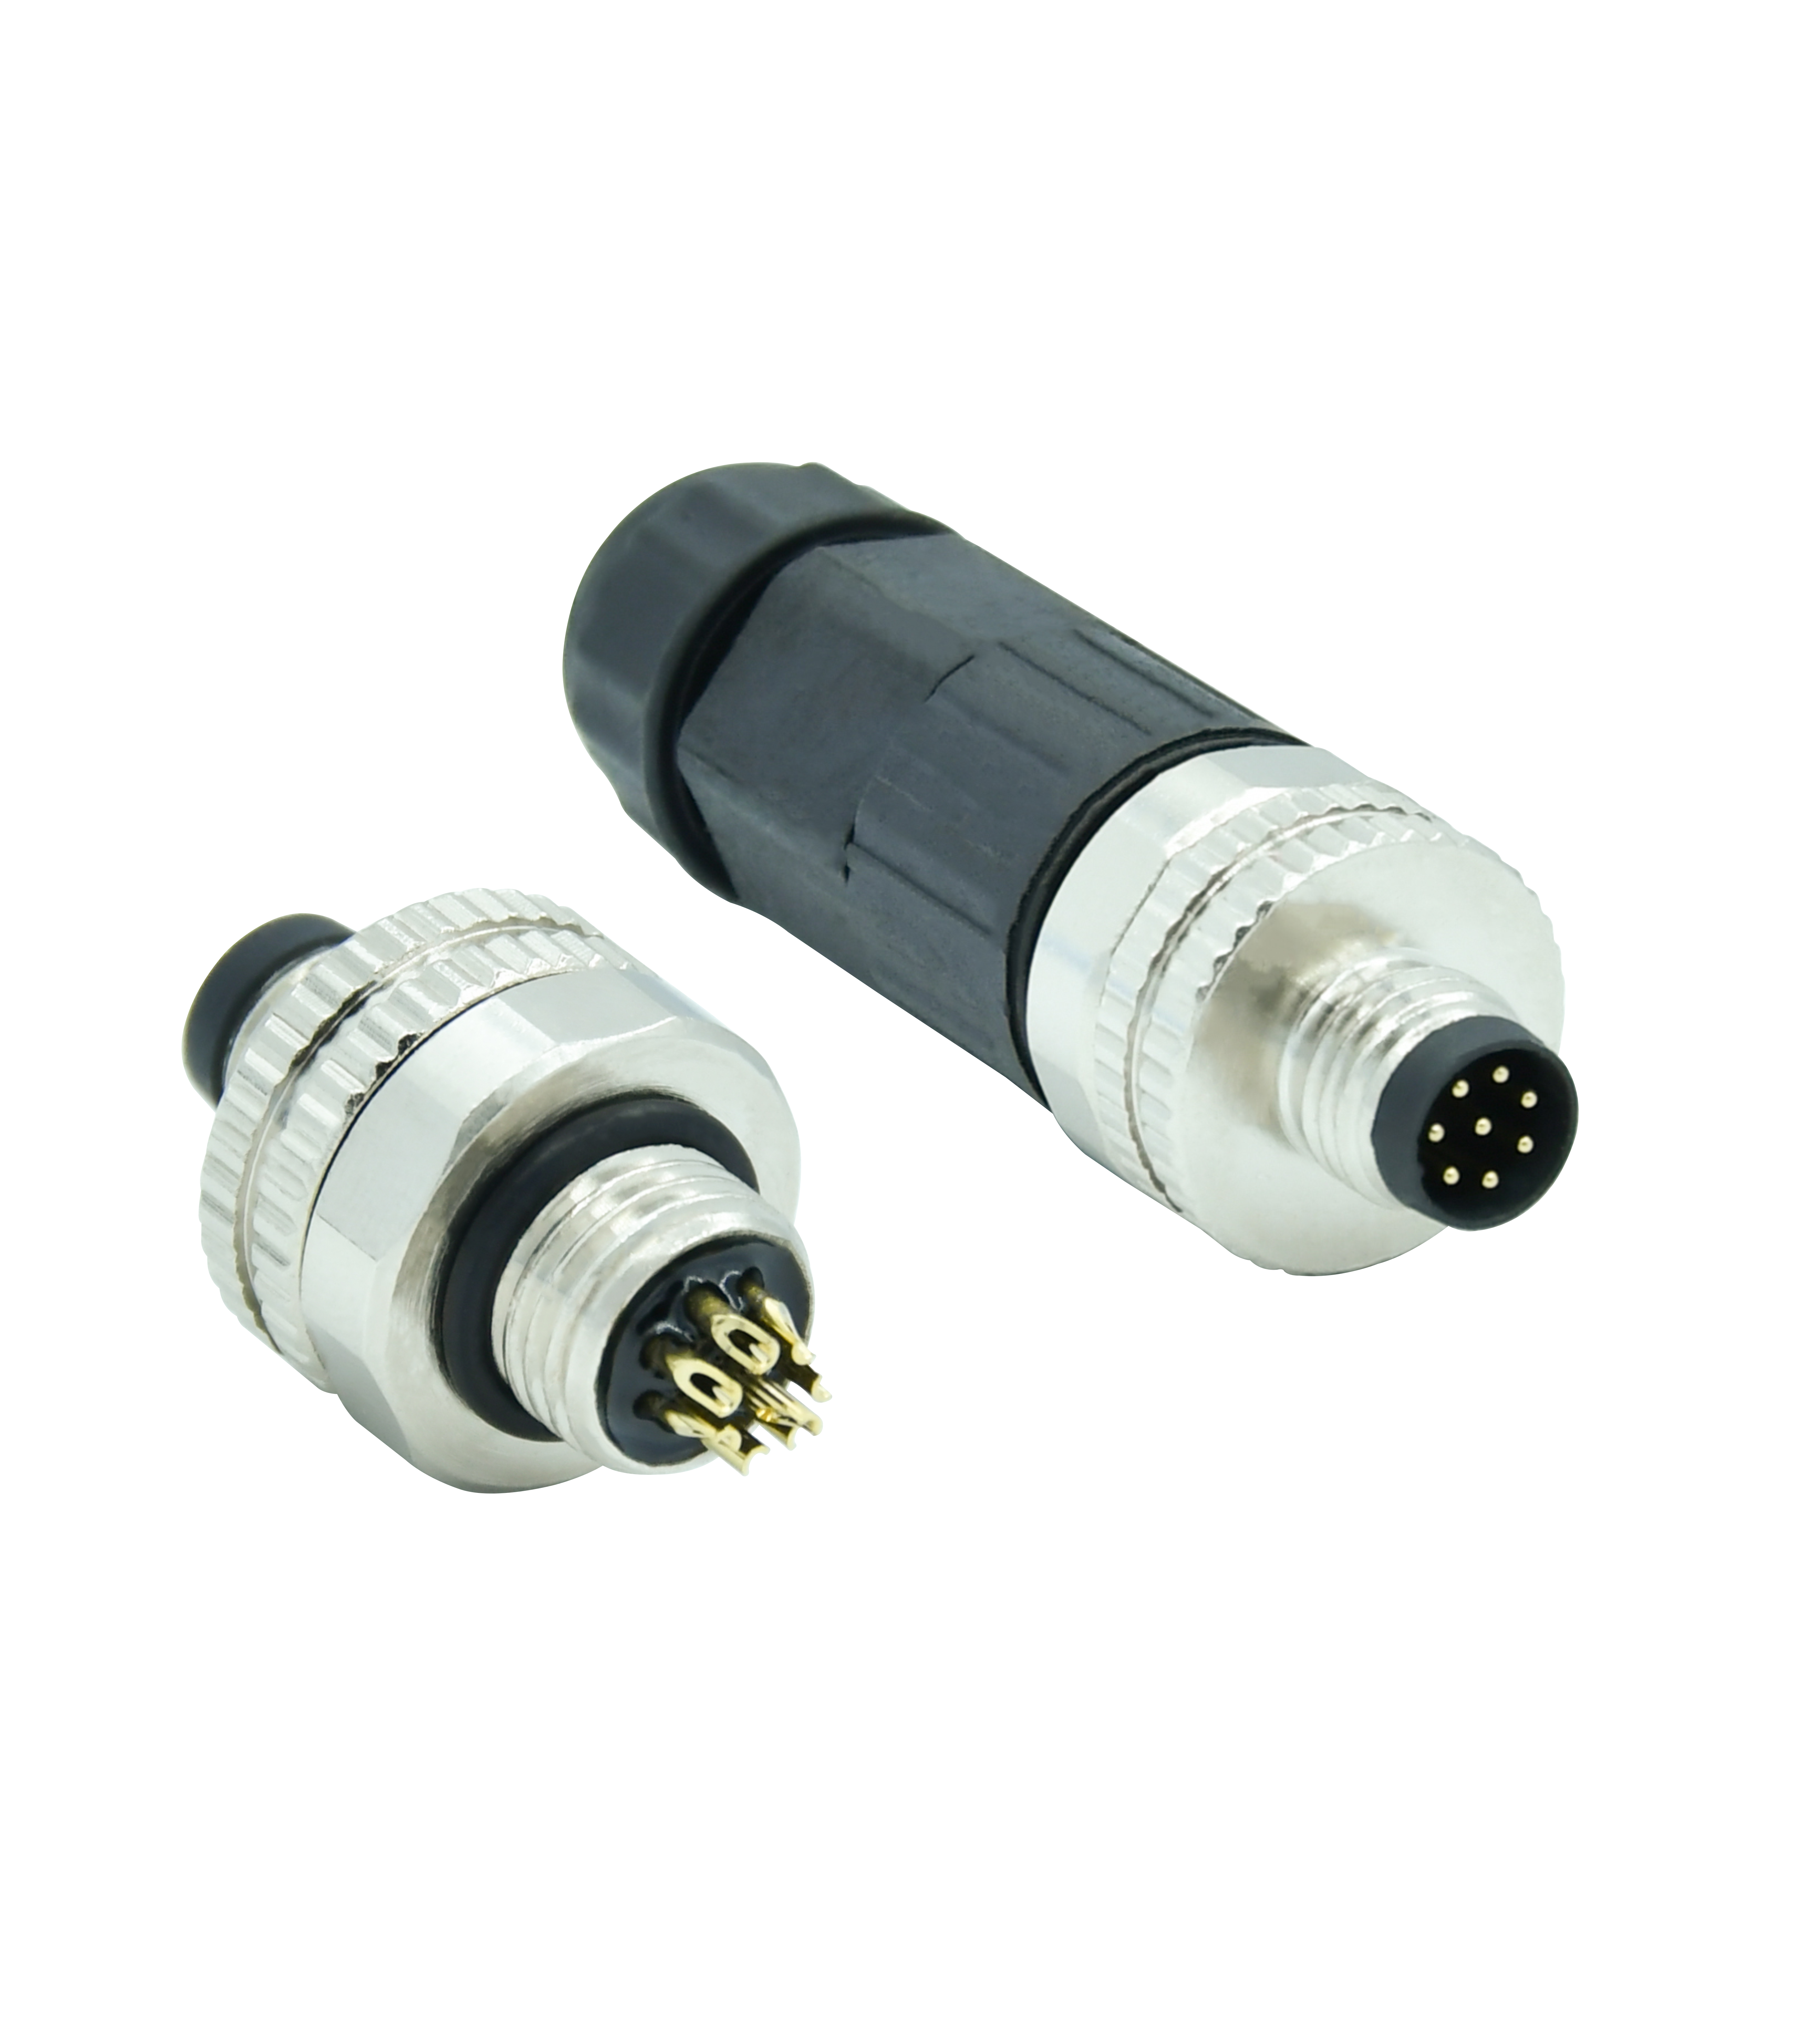 Rigoal's M8 Connector: The Ultimate Solution for Industrial Connectivity